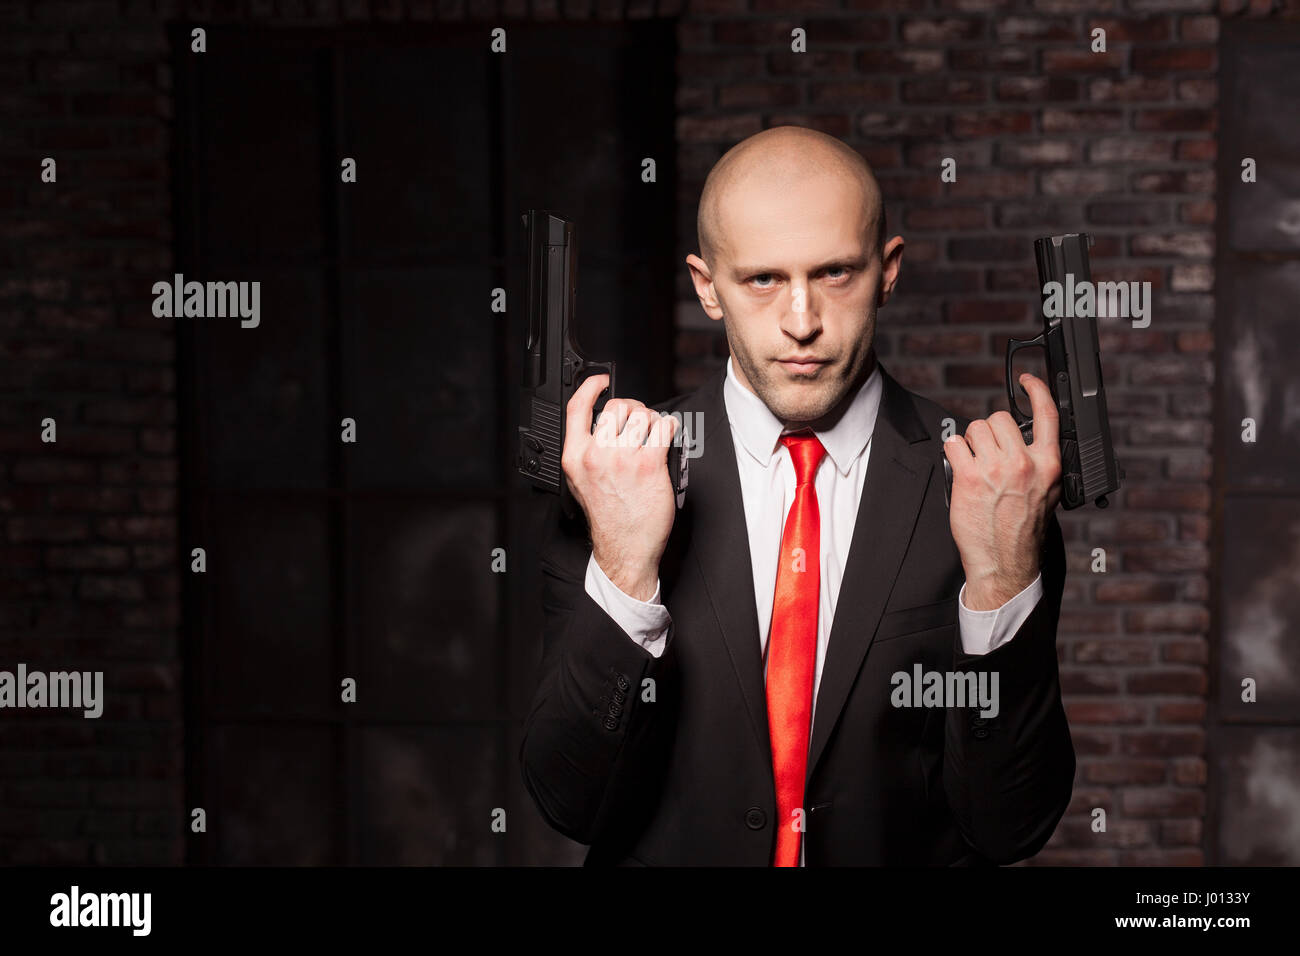 Contract killer wallpaper, background or poster concept. Assassin in suit and red tie holding pistols in hand Stock Photo